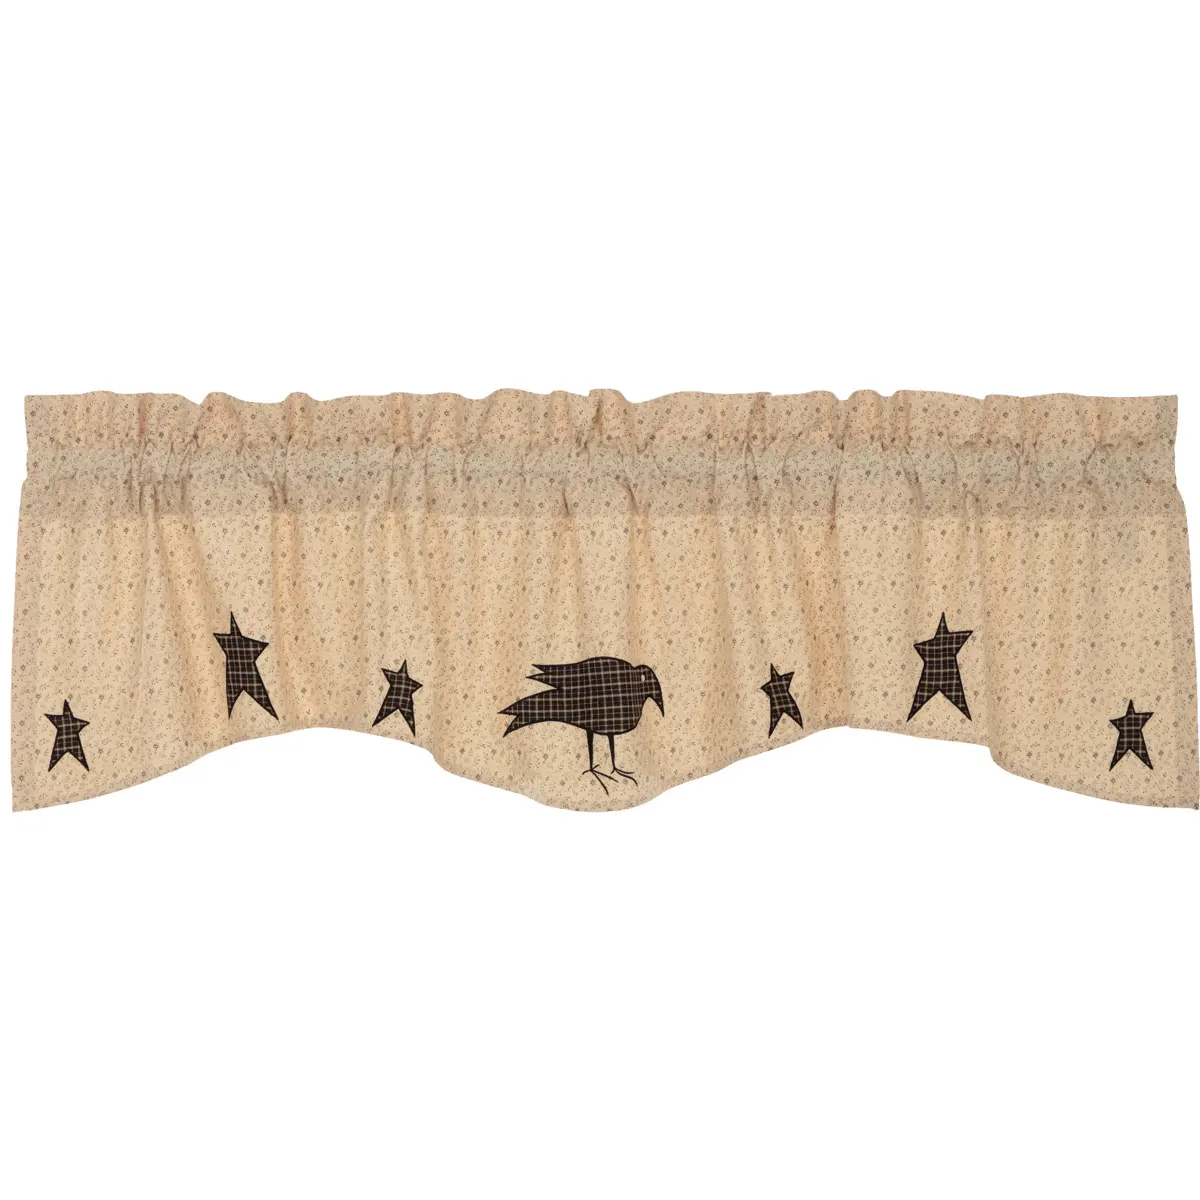 Kettle Grove Applique Crow and Star Valance 16x60